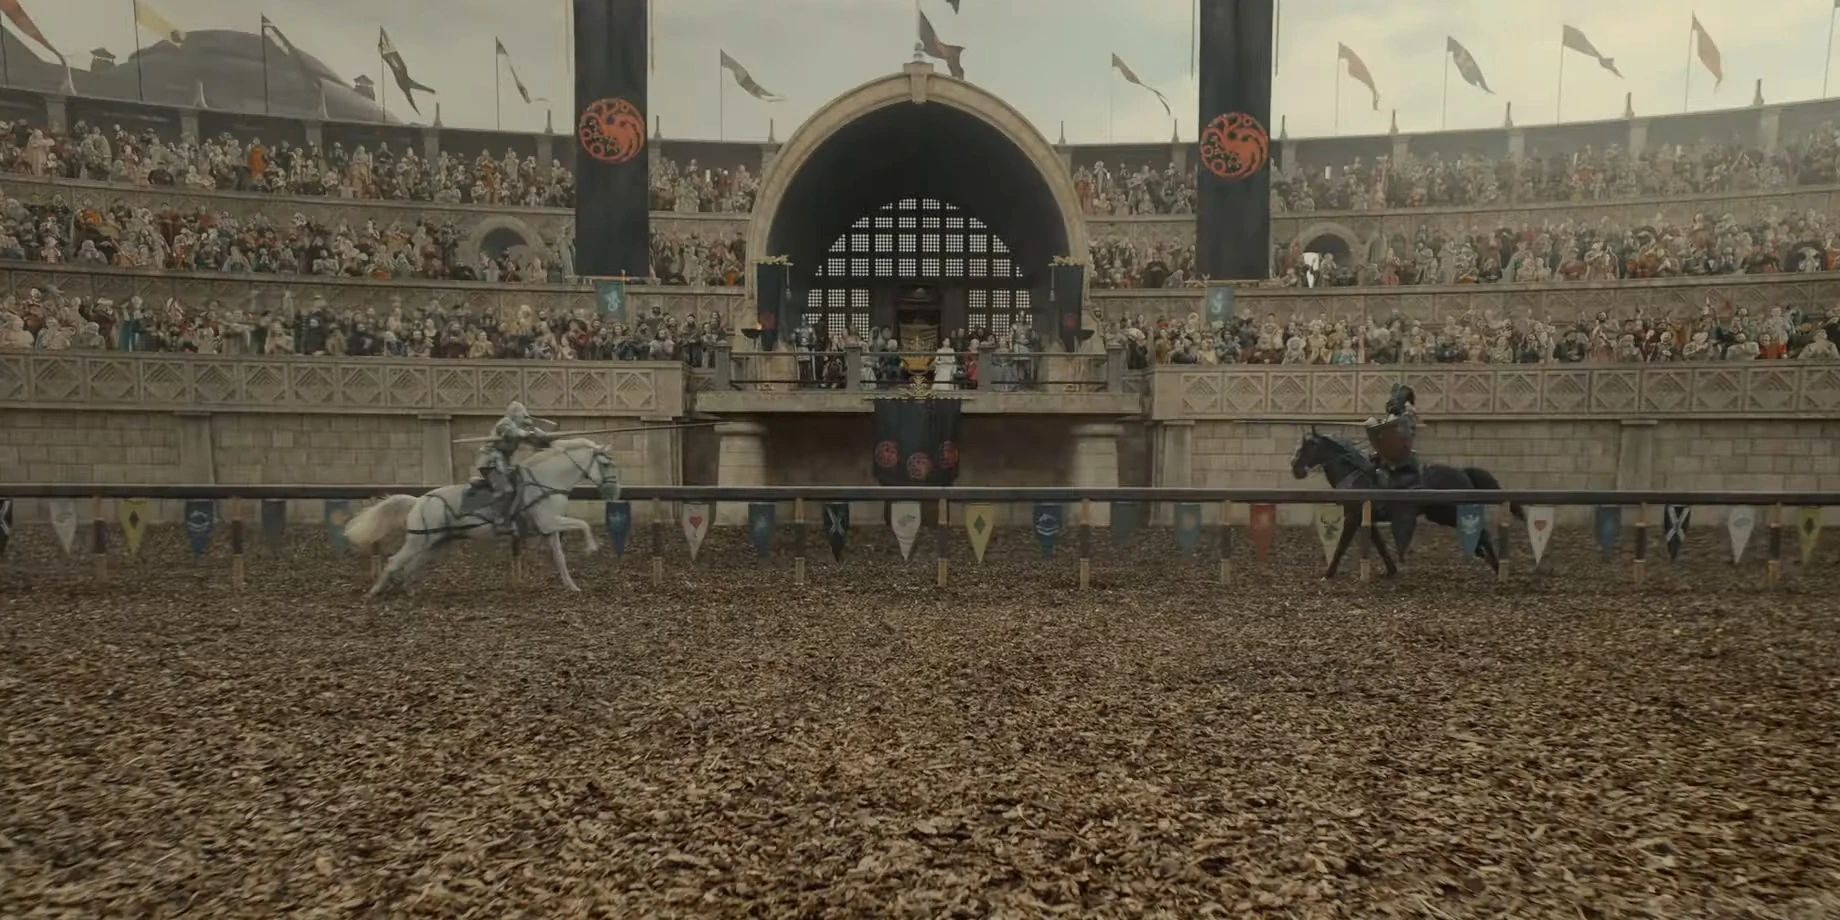 Trial by Seven in Game of Thrones